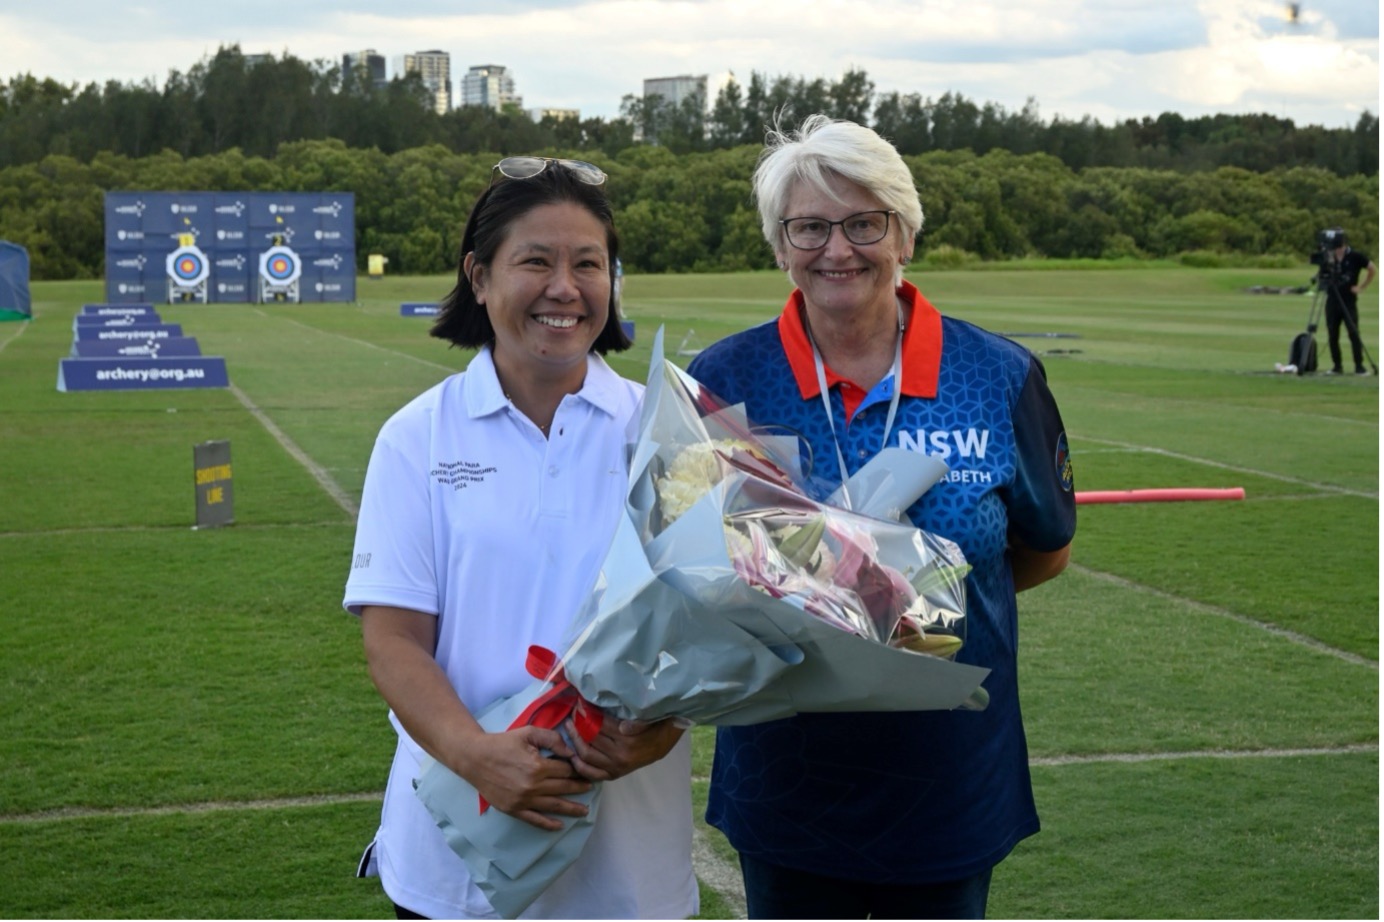 Gloria Tse from Sydney Olympic Park Archers is the first recipient of the Australia Australia Play Well Win Well Award